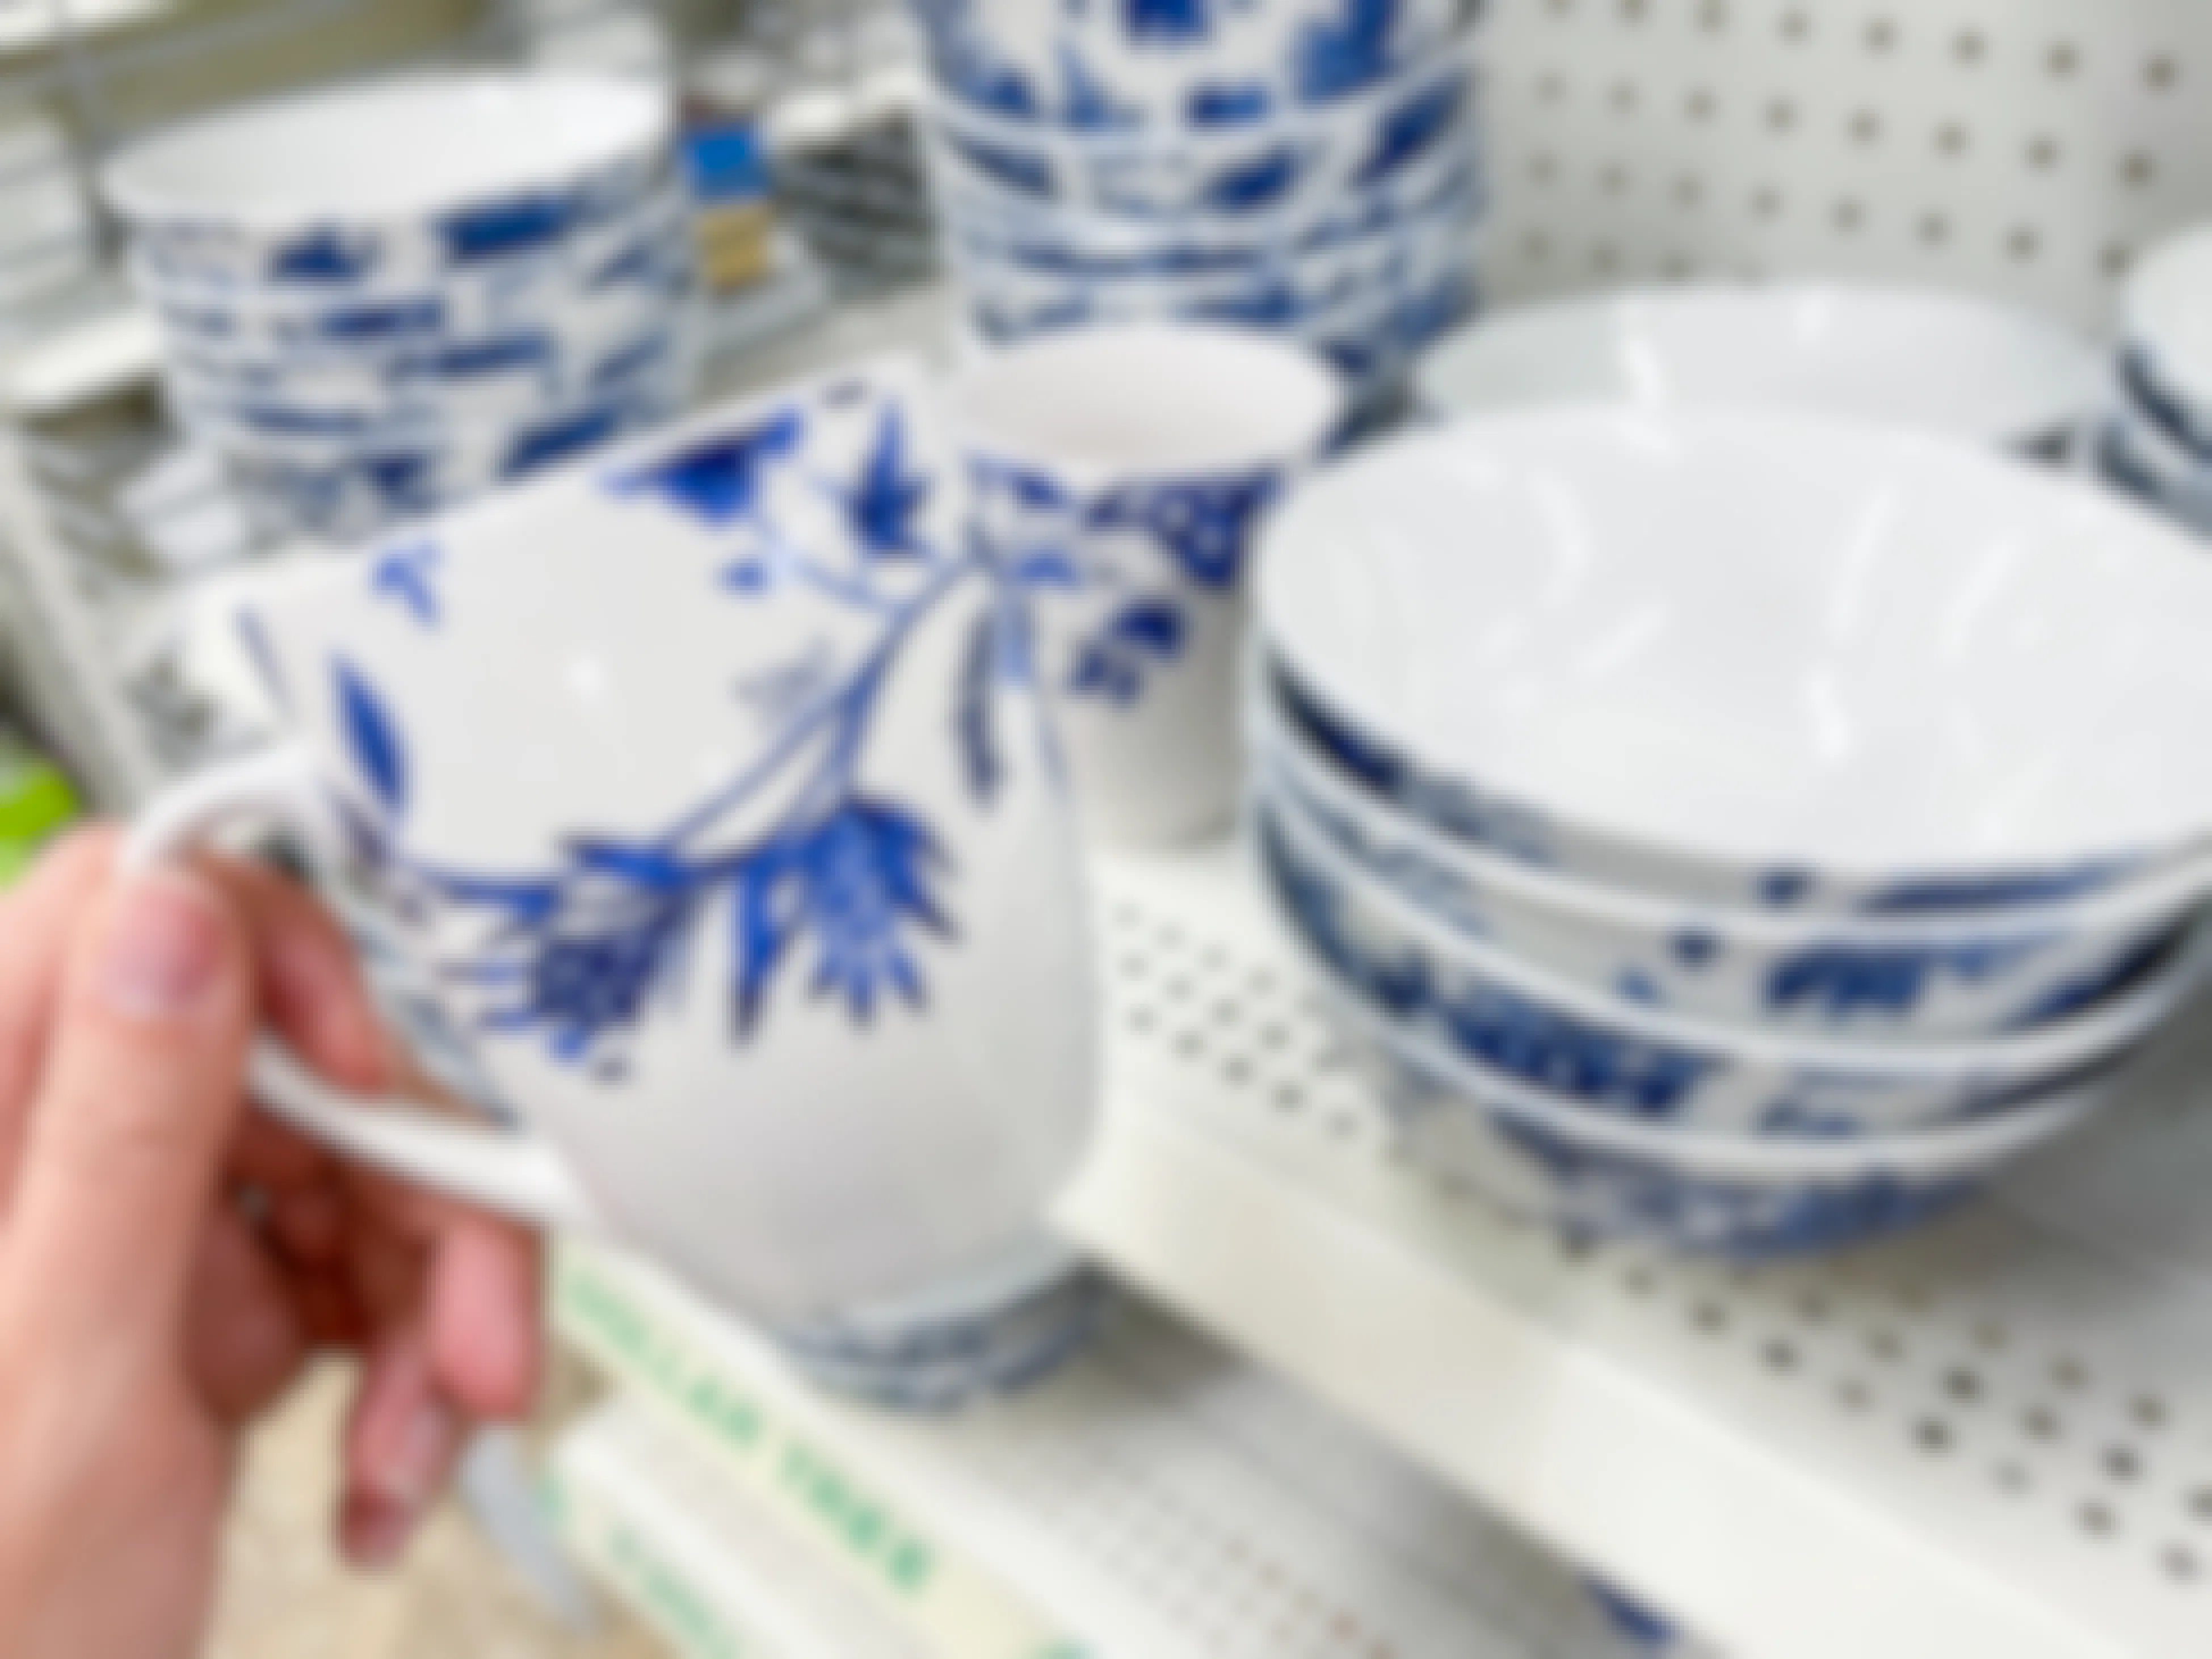 Floral patterend mugs and bowls at dollar tree